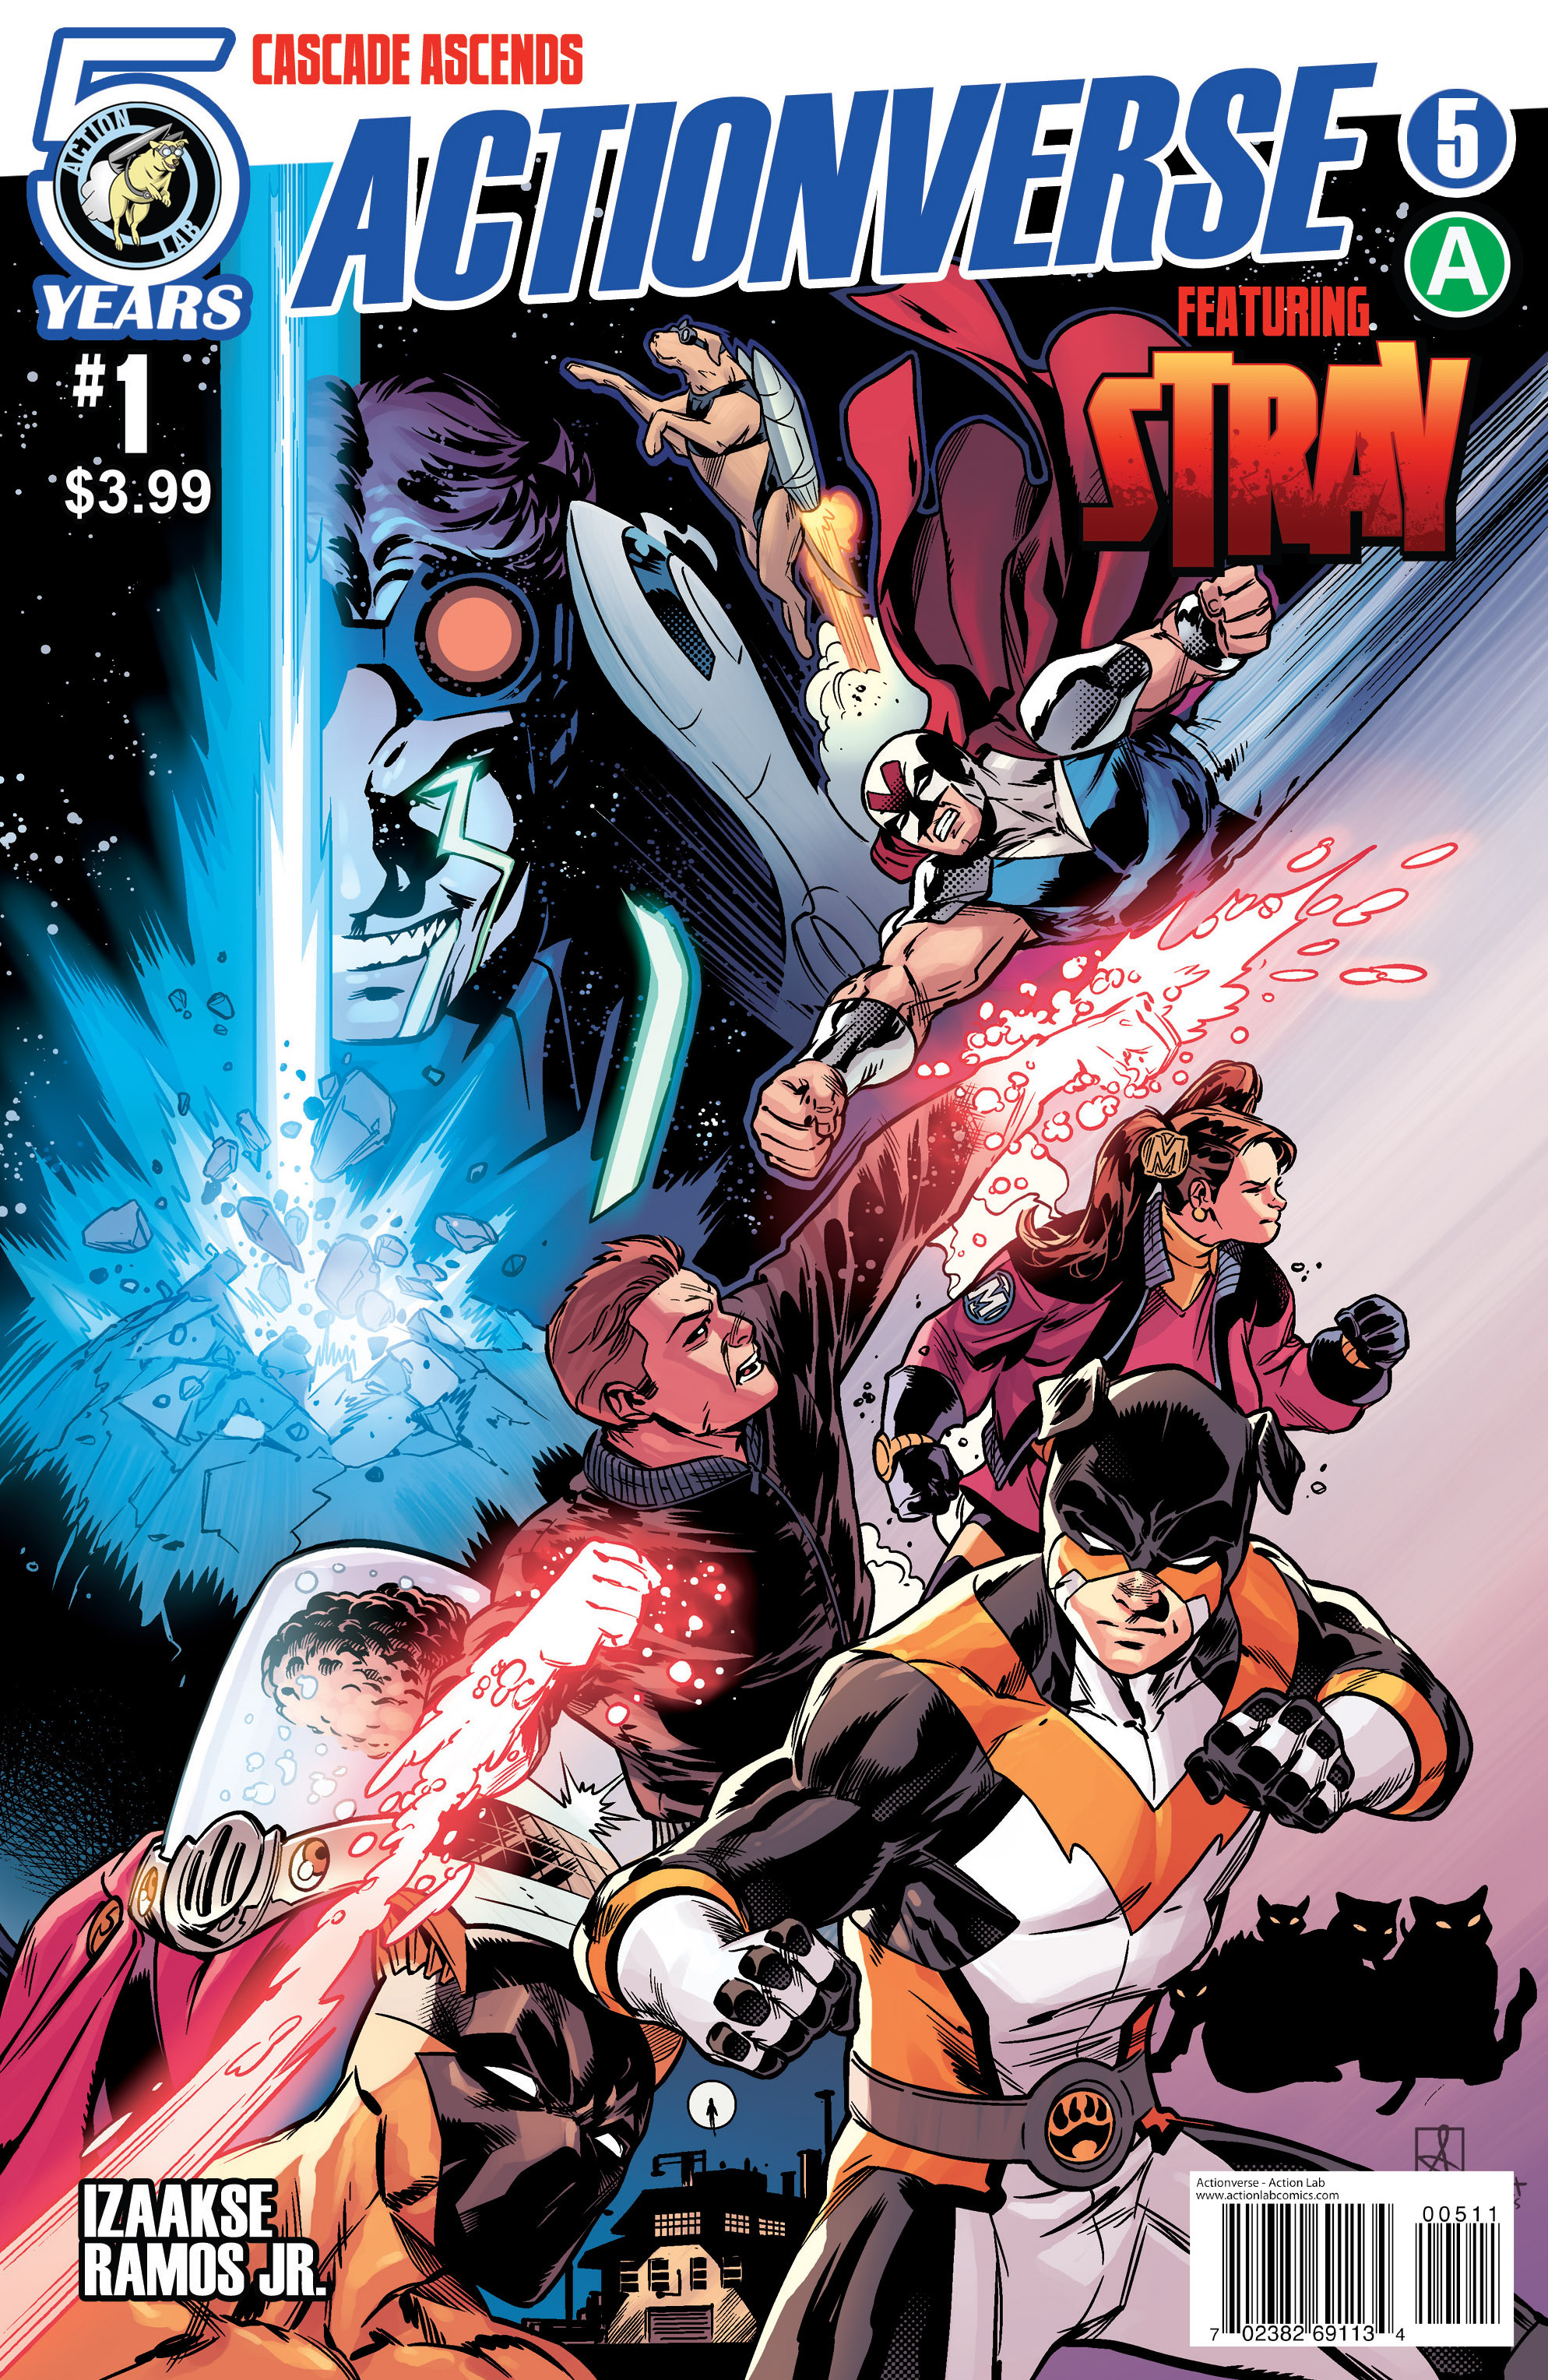 Read online Actionverse comic -  Issue #5 - 1